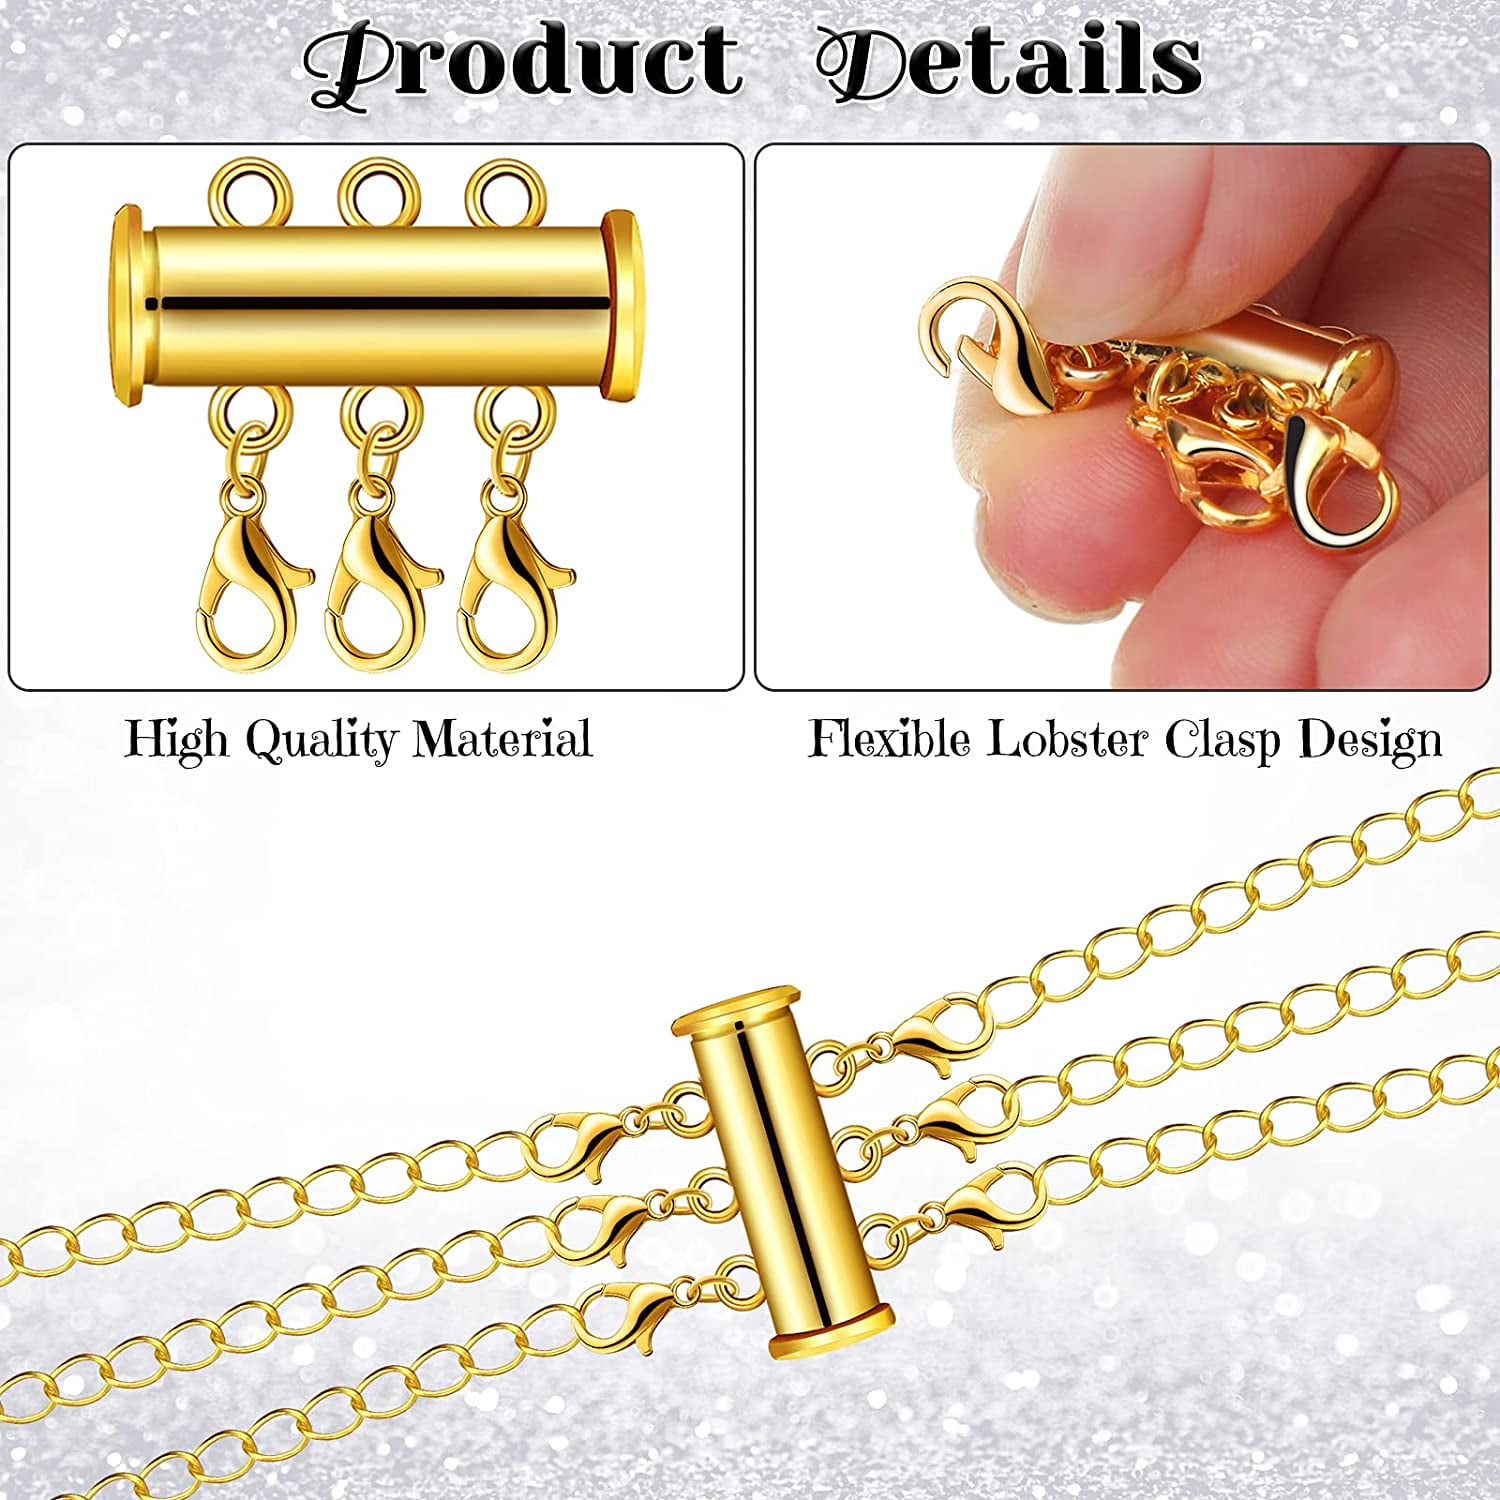  YMCAFZ Layered Necklace Spacer Clasp, 3 Strands Necklaces Slide  Magnetic Tube Lock with Lobster Clasps, Jewelry Clasps Connectors for  Layered Bracelet Jewelry Crafts Necklace, 2 Pack Gold and Sliver : Arts